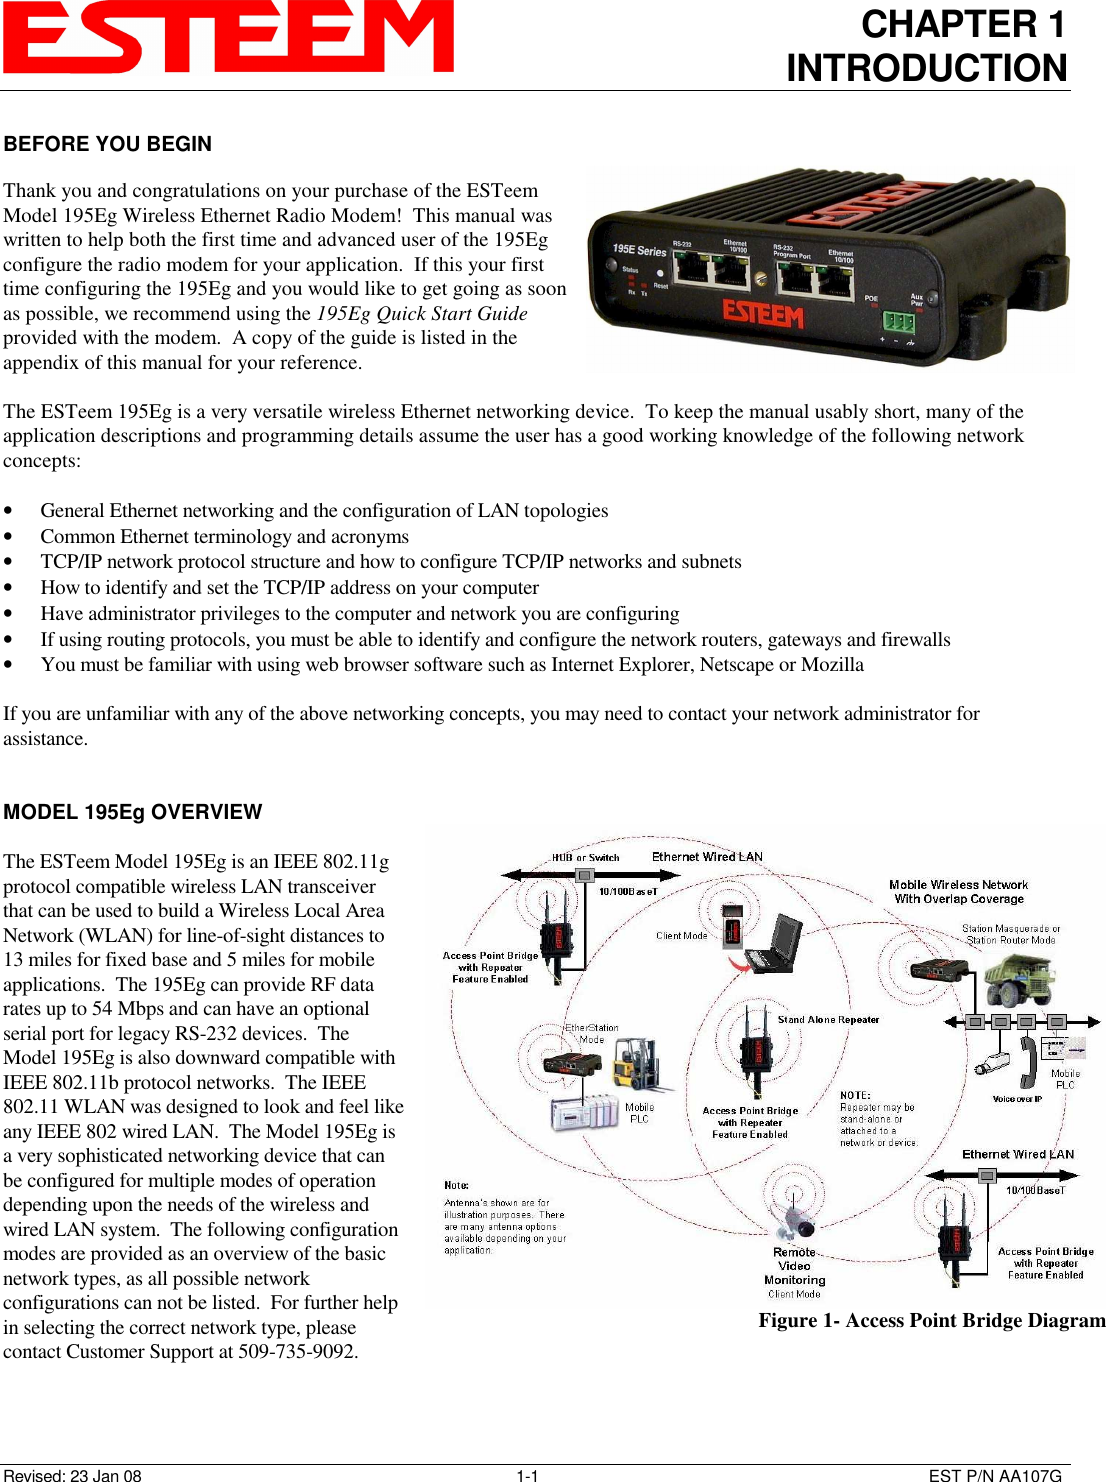 CHAPTER 1 INTRODUCTION   Revised: 23 Jan 08  1-1  EST P/N AA107G BEFORE YOU BEGIN  Thank you and congratulations on your purchase of the ESTeem Model 195Eg Wireless Ethernet Radio Modem!  This manual was written to help both the first time and advanced user of the 195Eg configure the radio modem for your application.  If this your first time configuring the 195Eg and you would like to get going as soon as possible, we recommend using the 195Eg Quick Start Guide provided with the modem.  A copy of the guide is listed in the appendix of this manual for your reference.  The ESTeem 195Eg is a very versatile wireless Ethernet networking device.  To keep the manual usably short, many of the application descriptions and programming details assume the user has a good working knowledge of the following network concepts:  • General Ethernet networking and the configuration of LAN topologies  • Common Ethernet terminology and acronyms • TCP/IP network protocol structure and how to configure TCP/IP networks and subnets • How to identify and set the TCP/IP address on your computer • Have administrator privileges to the computer and network you are configuring • If using routing protocols, you must be able to identify and configure the network routers, gateways and firewalls • You must be familiar with using web browser software such as Internet Explorer, Netscape or Mozilla  If you are unfamiliar with any of the above networking concepts, you may need to contact your network administrator for assistance.   MODEL 195Eg OVERVIEW  The ESTeem Model 195Eg is an IEEE 802.11g protocol compatible wireless LAN transceiver that can be used to build a Wireless Local Area Network (WLAN) for line-of-sight distances to 13 miles for fixed base and 5 miles for mobile applications.  The 195Eg can provide RF data rates up to 54 Mbps and can have an optional serial port for legacy RS-232 devices.  The Model 195Eg is also downward compatible with IEEE 802.11b protocol networks.  The IEEE 802.11 WLAN was designed to look and feel like any IEEE 802 wired LAN.  The Model 195Eg is a very sophisticated networking device that can be configured for multiple modes of operation depending upon the needs of the wireless and wired LAN system.  The following configuration modes are provided as an overview of the basic network types, as all possible network configurations can not be listed.  For further help in selecting the correct network type, please contact Customer Support at 509-735-9092.     Figure 1- Access Point Bridge Diagram 